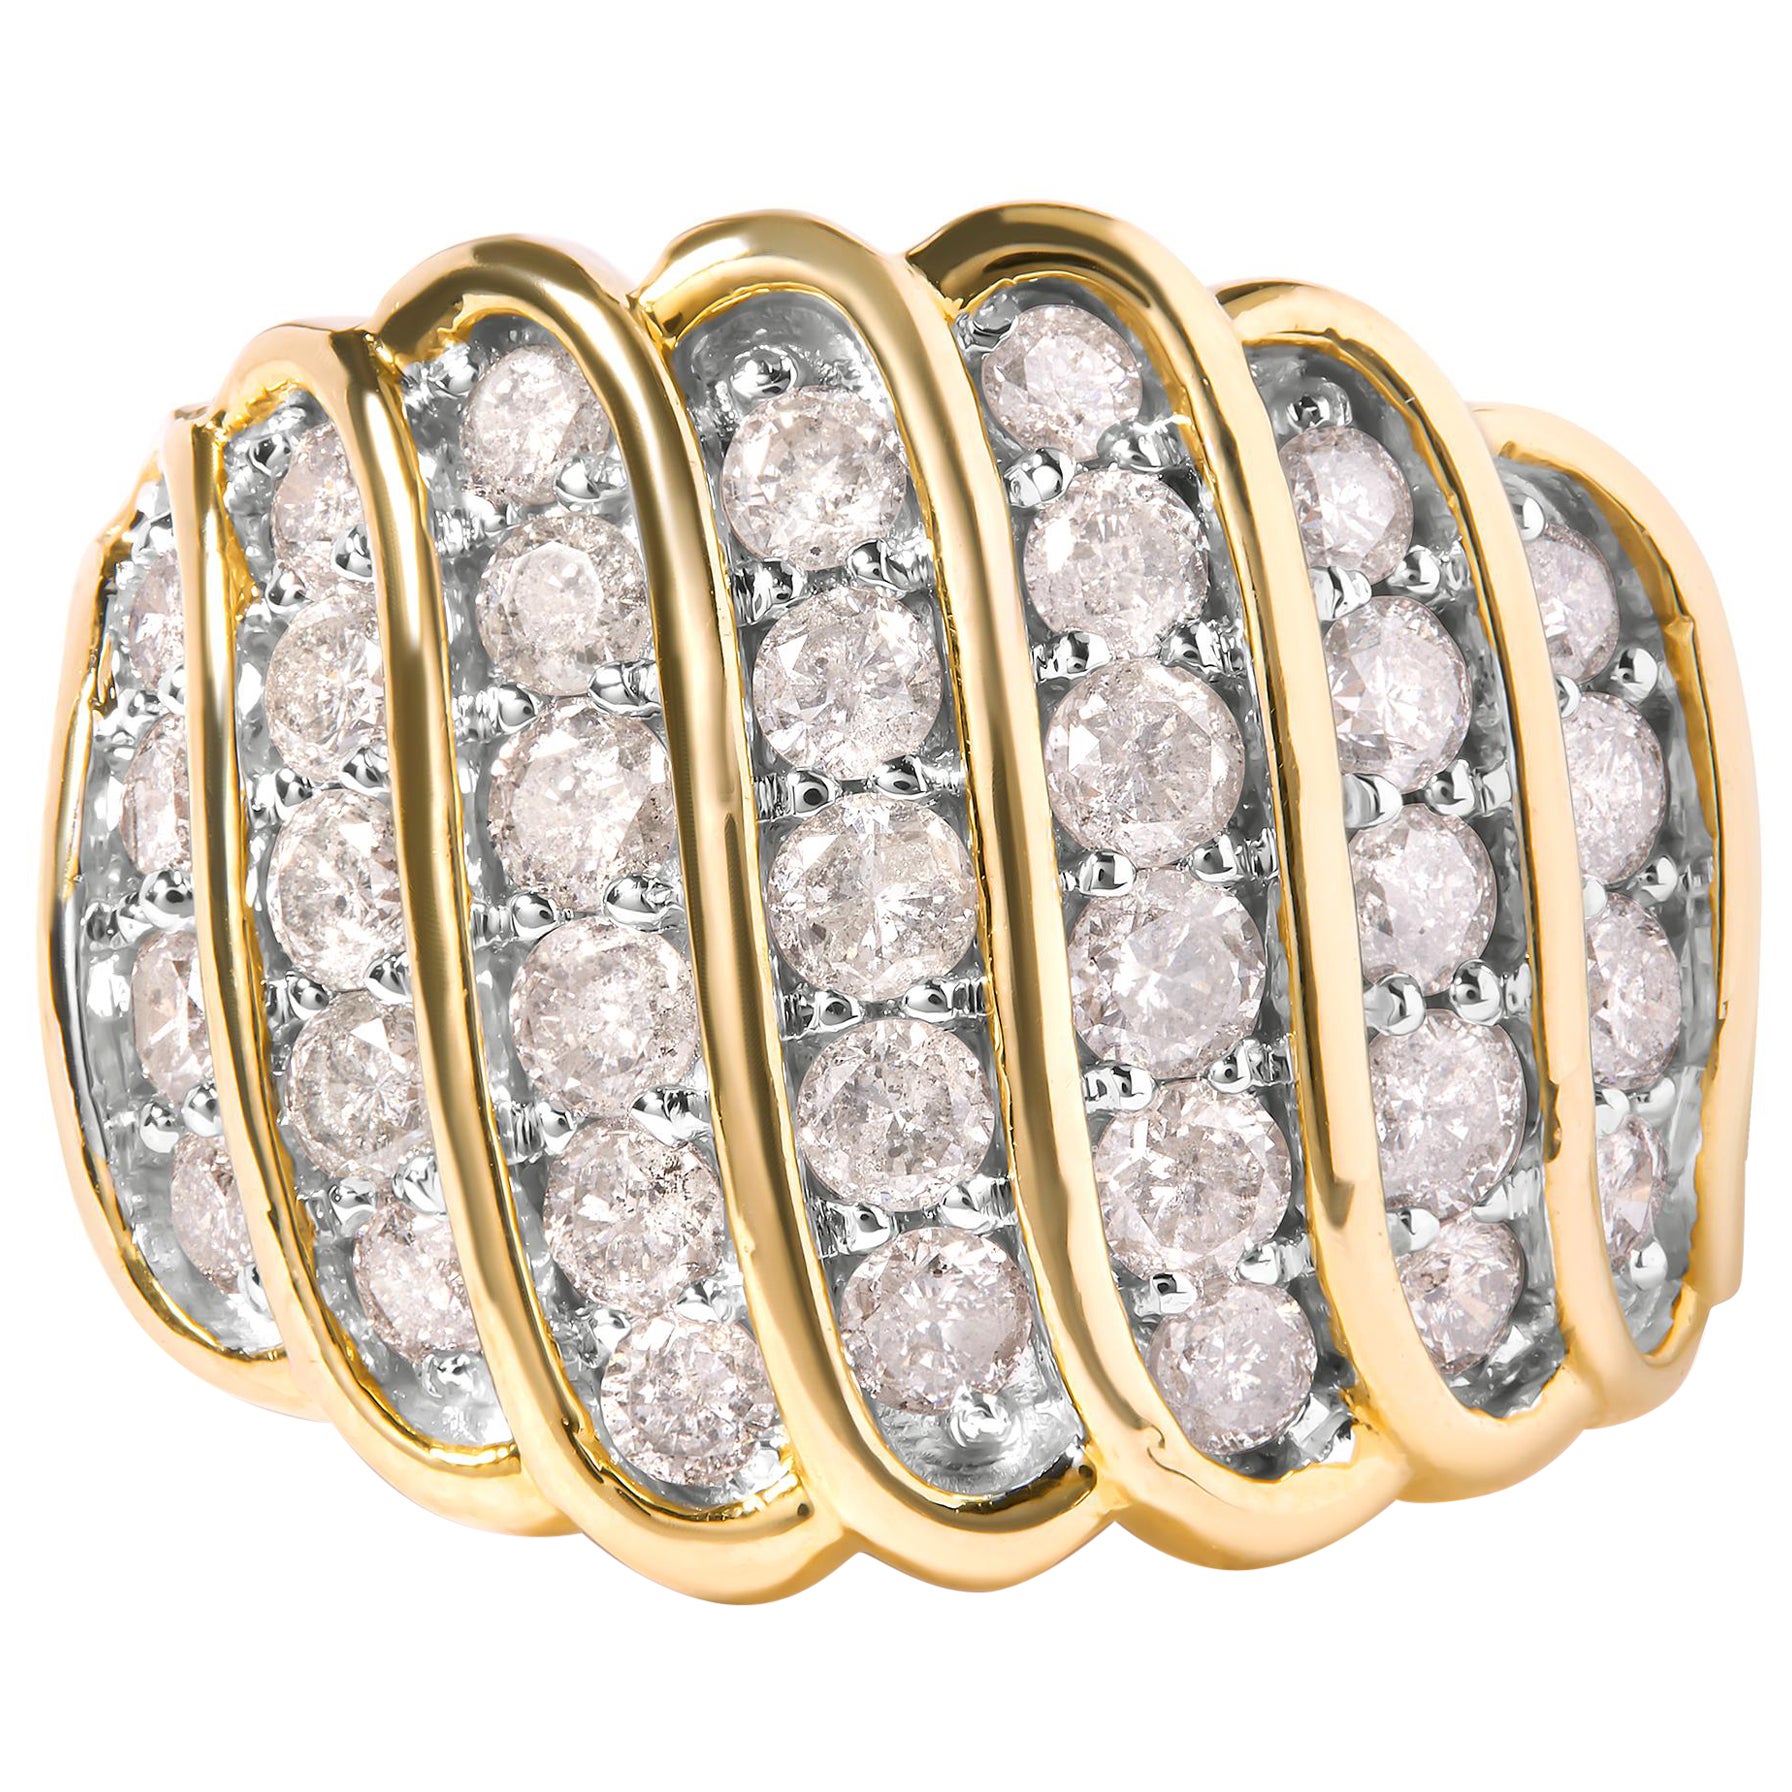 10 Yellow Gold 2.00 Cttw Diamond Multi Row Cocktail Band Ring